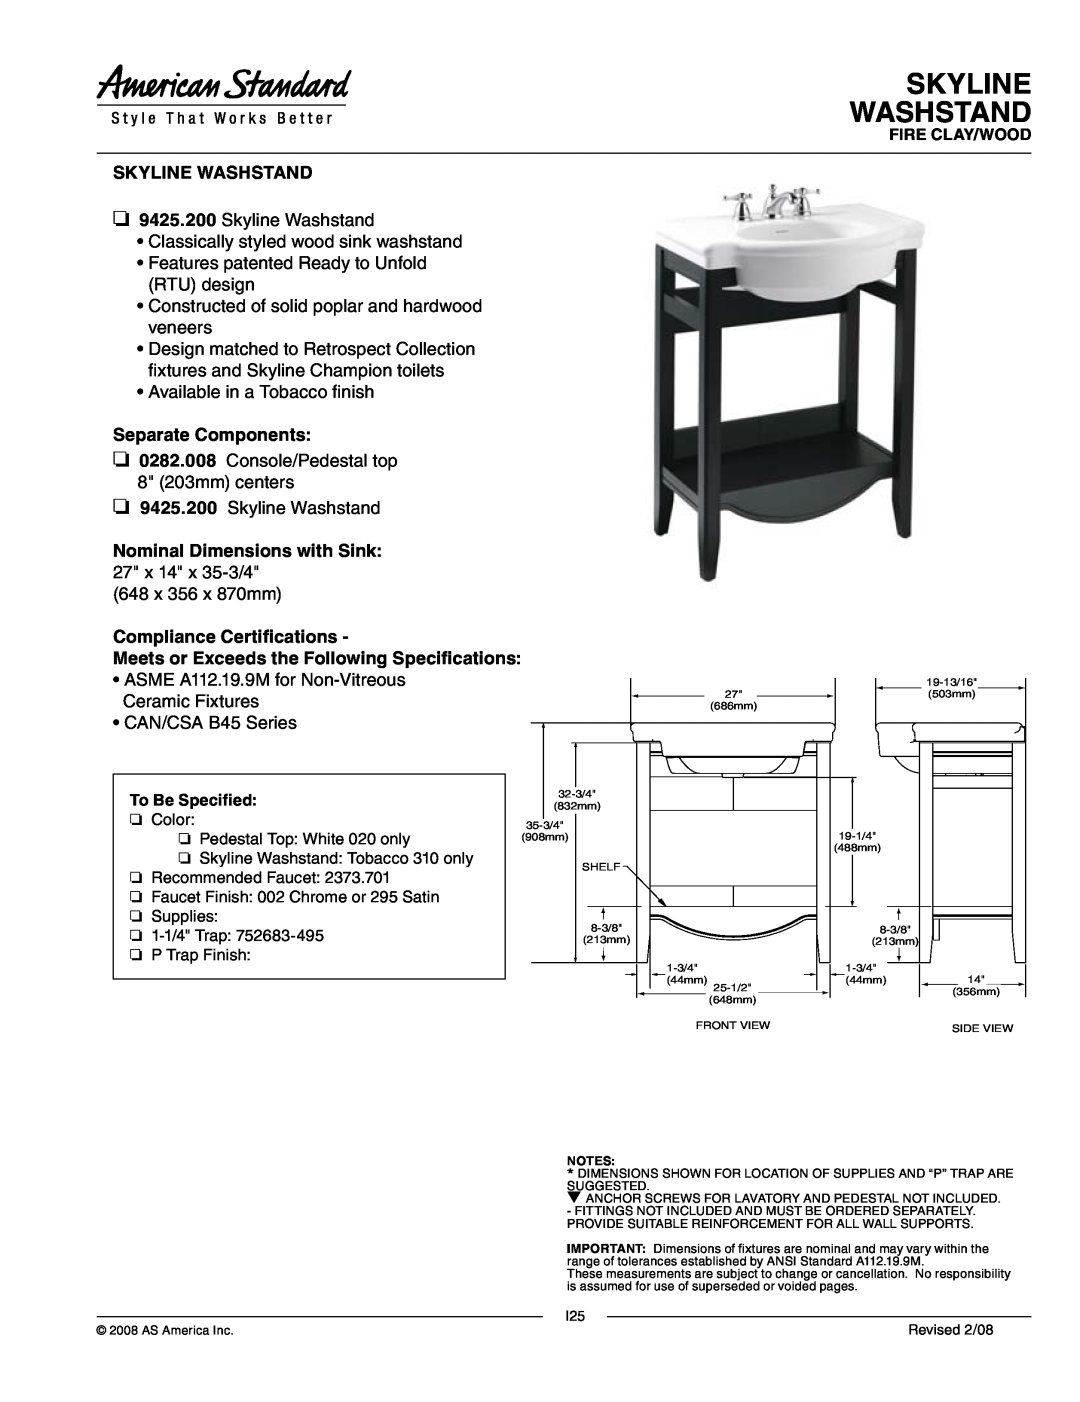 American Standard 0282.008, 9425.200 dimensions Skyline Washstand, Separate Components, Nominal Dimensions with Sink 